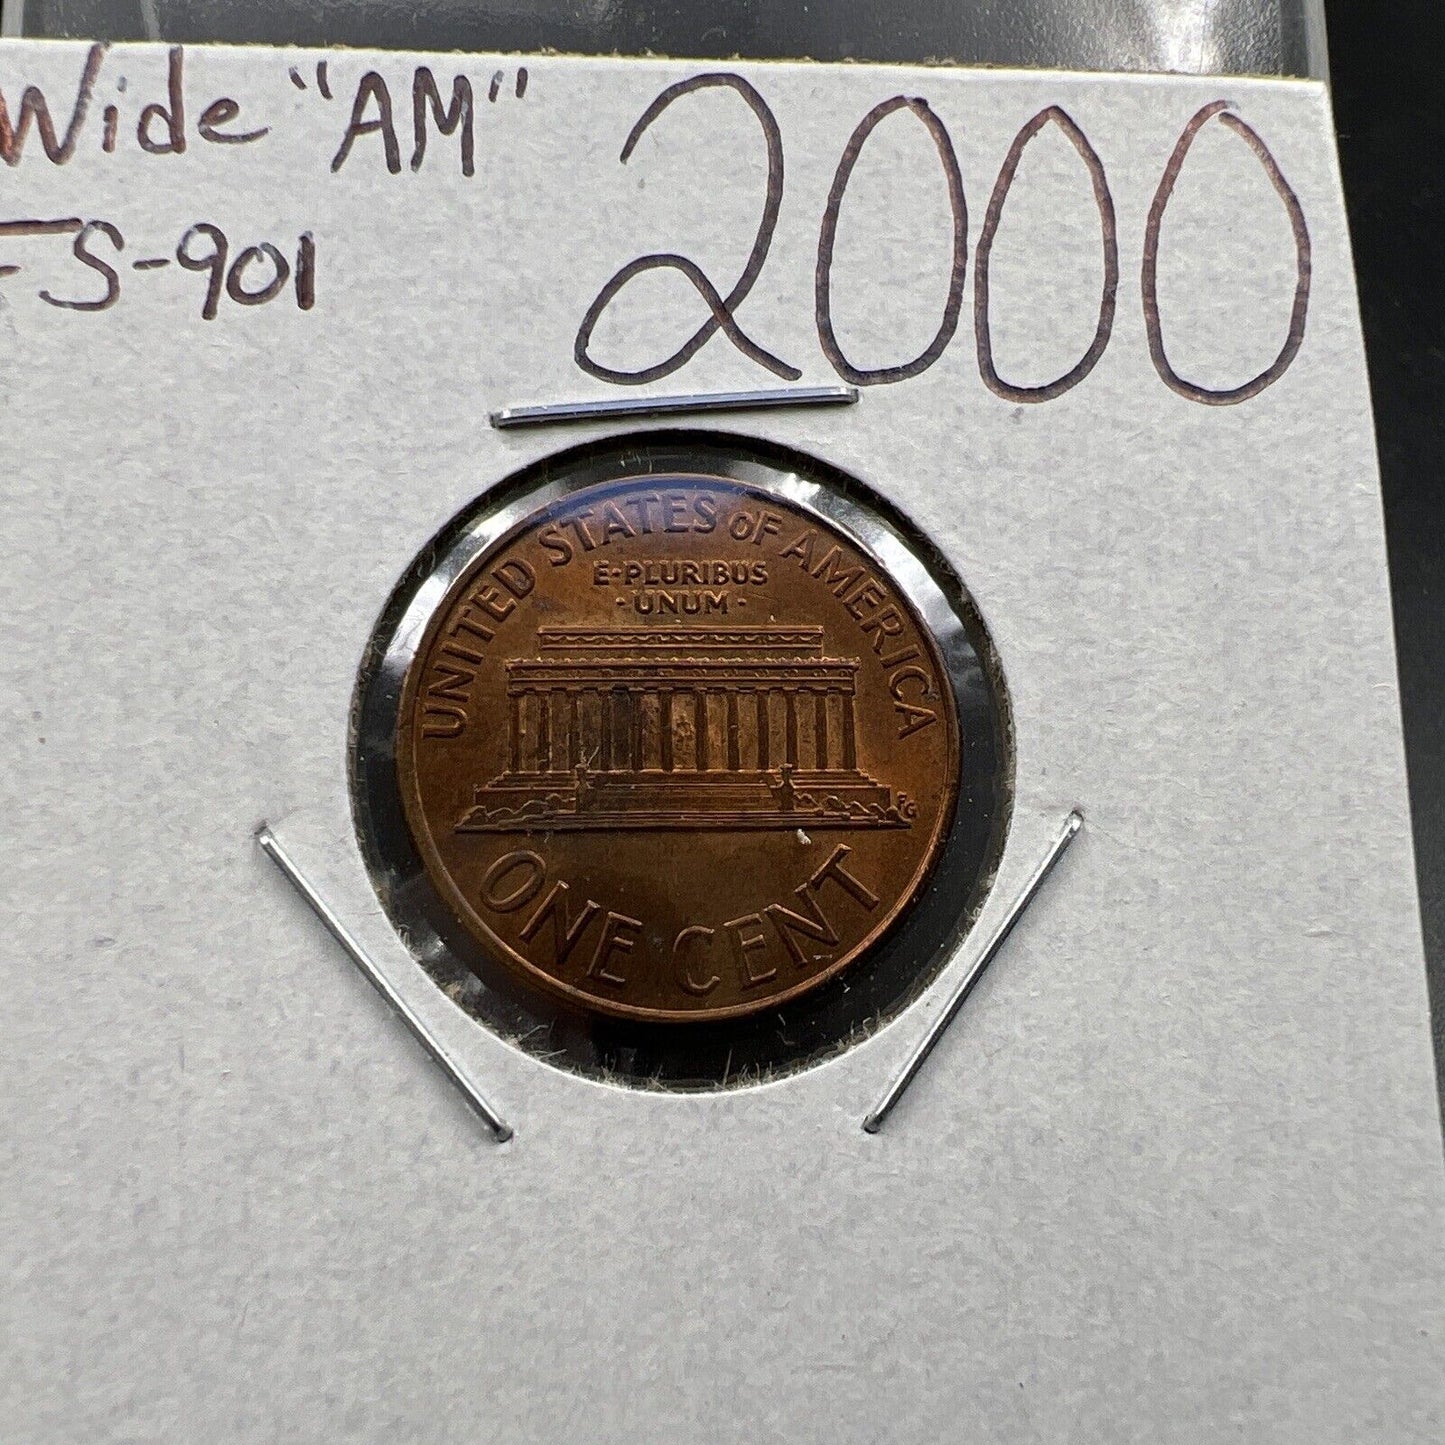 2000 1c Lincoln Memorial One Cent Penny Wide AM Variety CH AU FS-901 #E